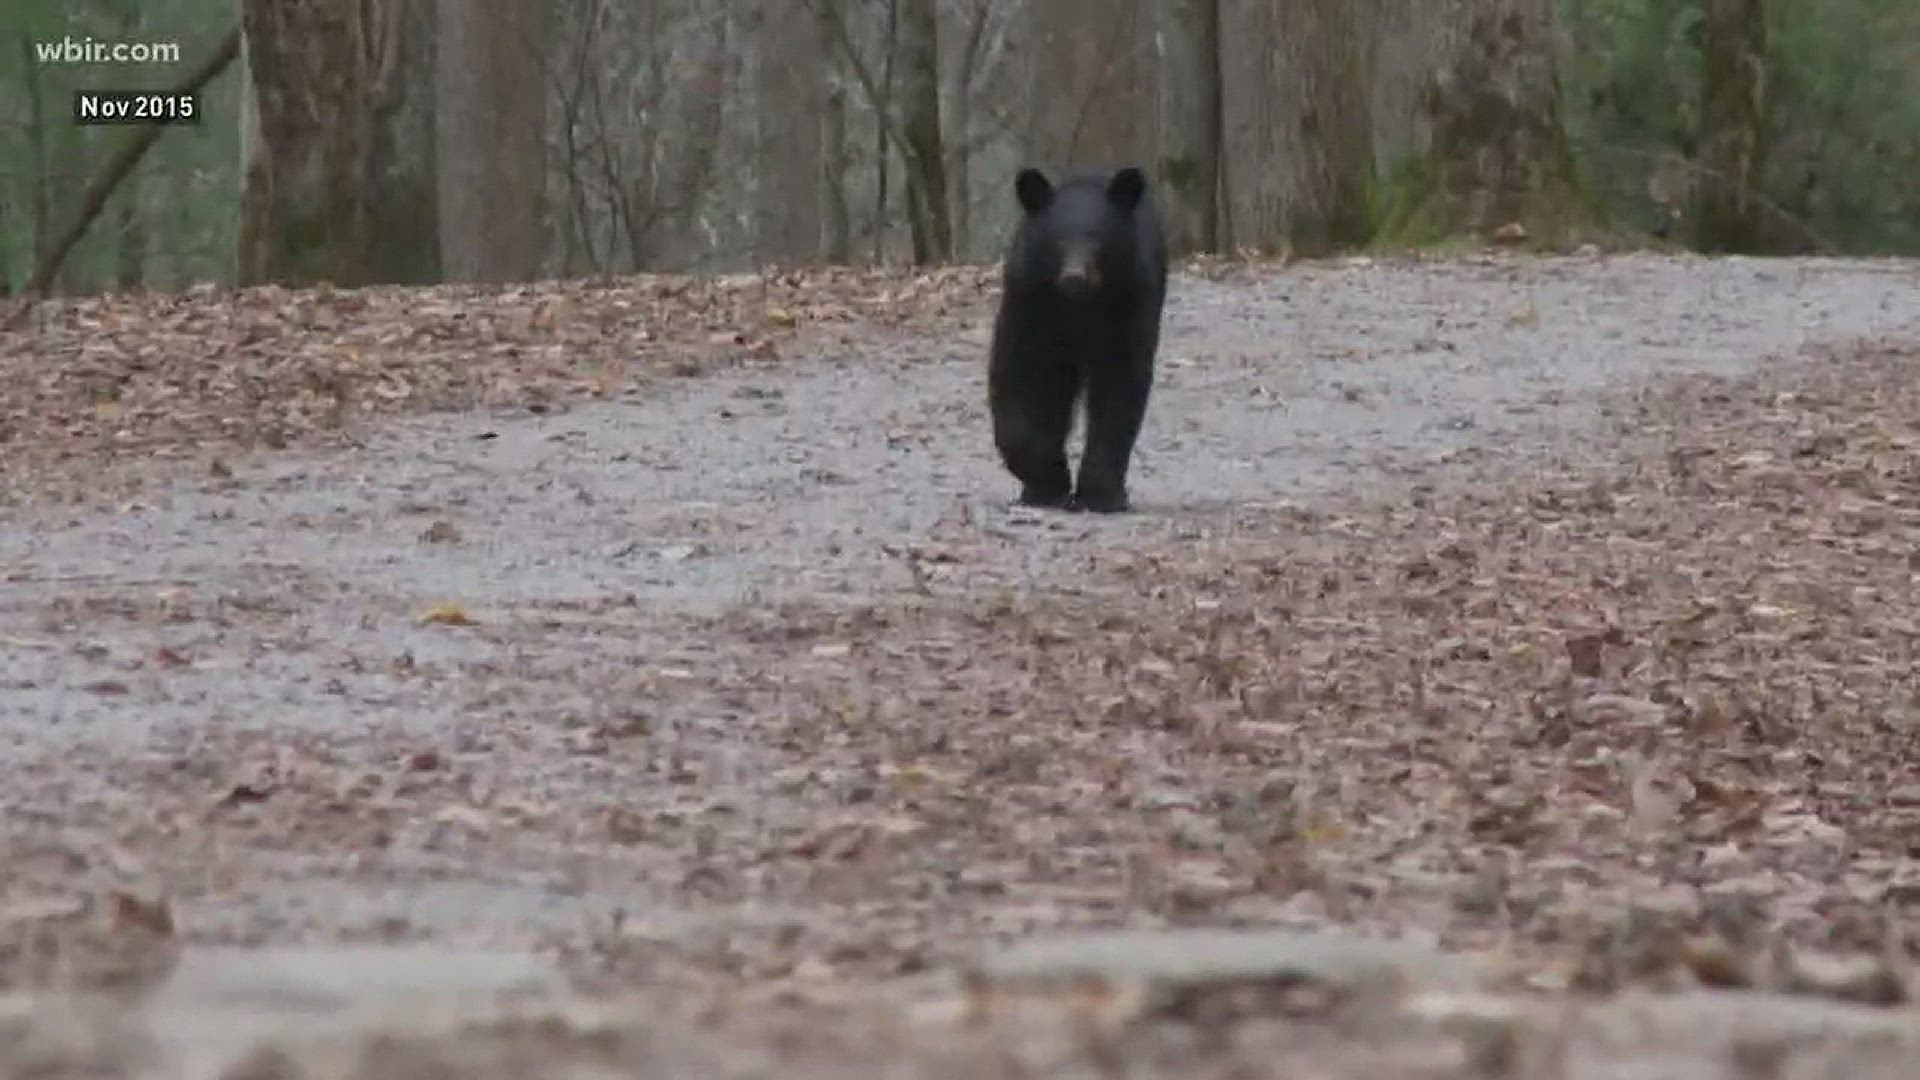 Bear activity picks up with Spring conditions